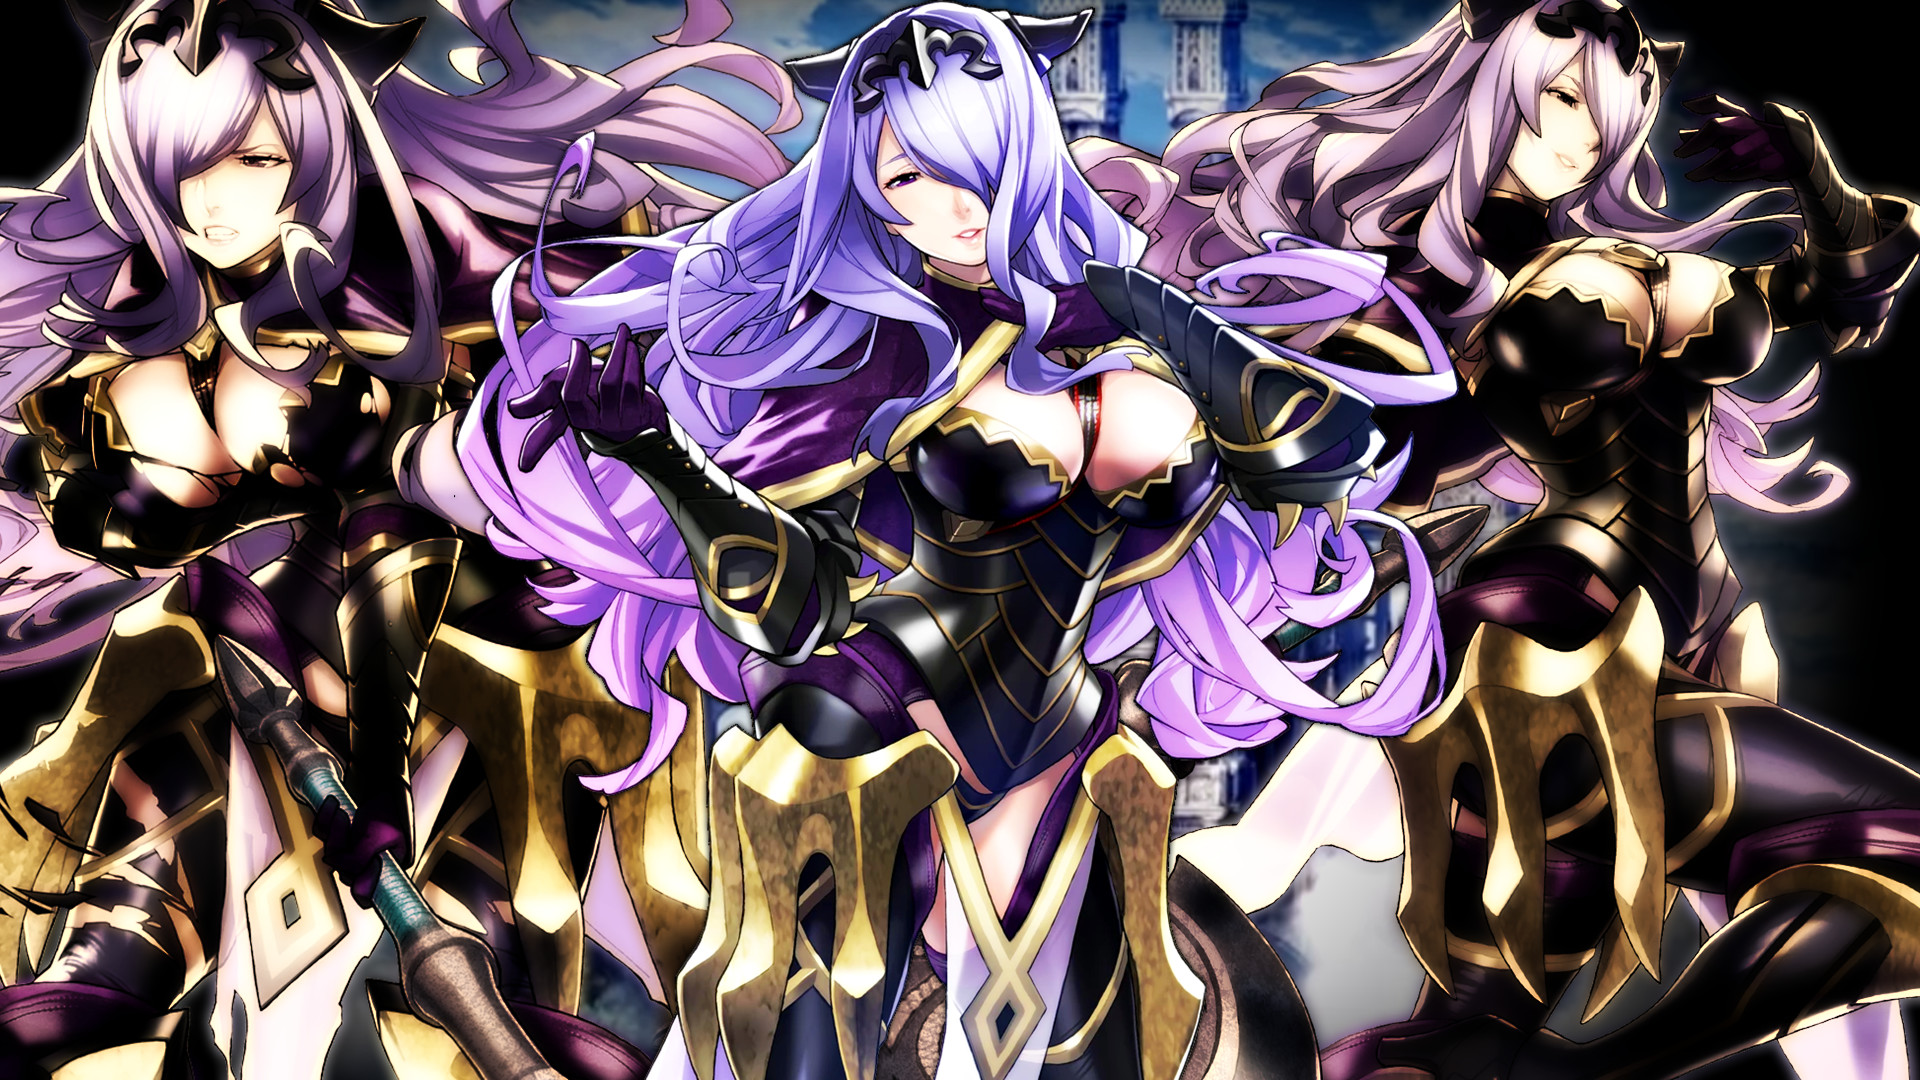 Fire Emblem Heroes - Camilla Wallpaper by AuroraMaster 1920x1080.